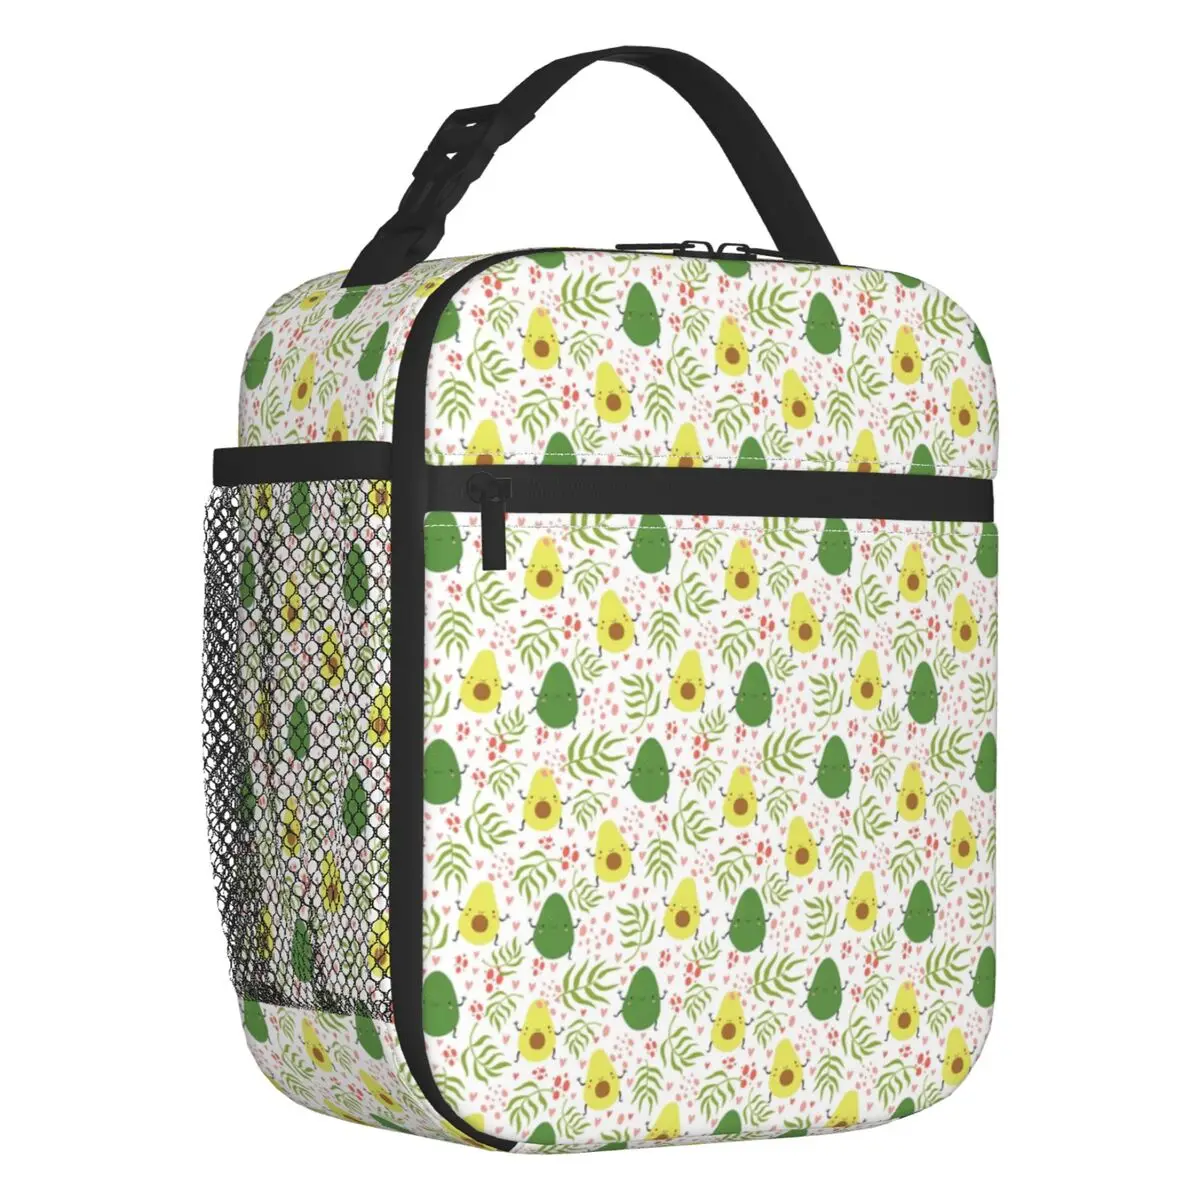 

Cute Green Avocado Pattern Insulated Lunch Bag for Women Leakproof Thermal Cooler Lunch Tote Beach Camping Travel